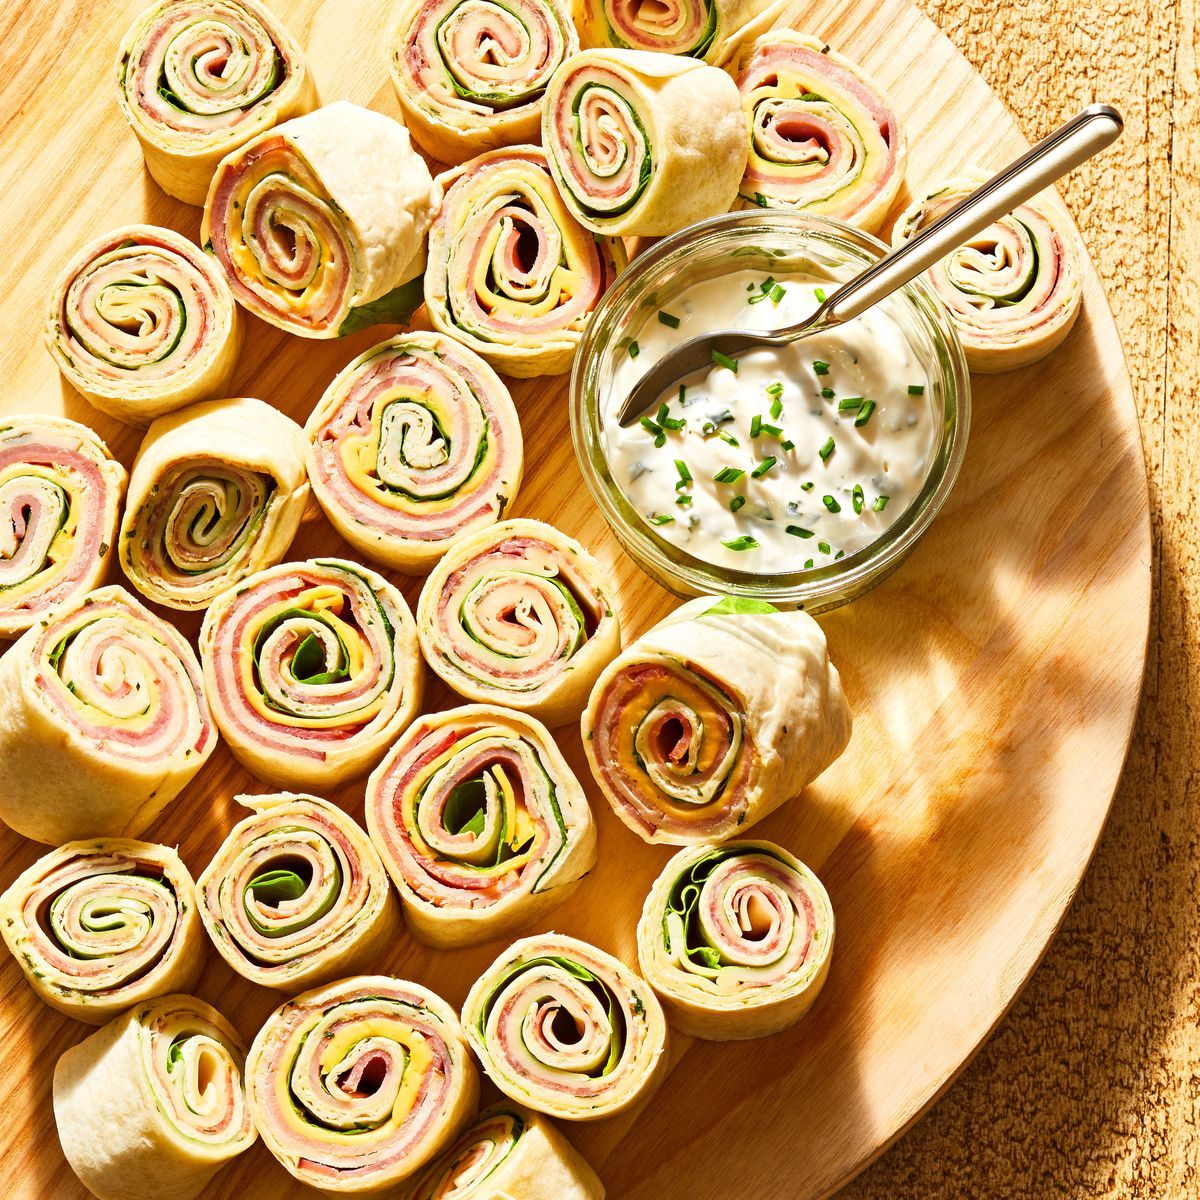 40 Finger Food Ideas That Will Be the Star of Your Next Dinner Party